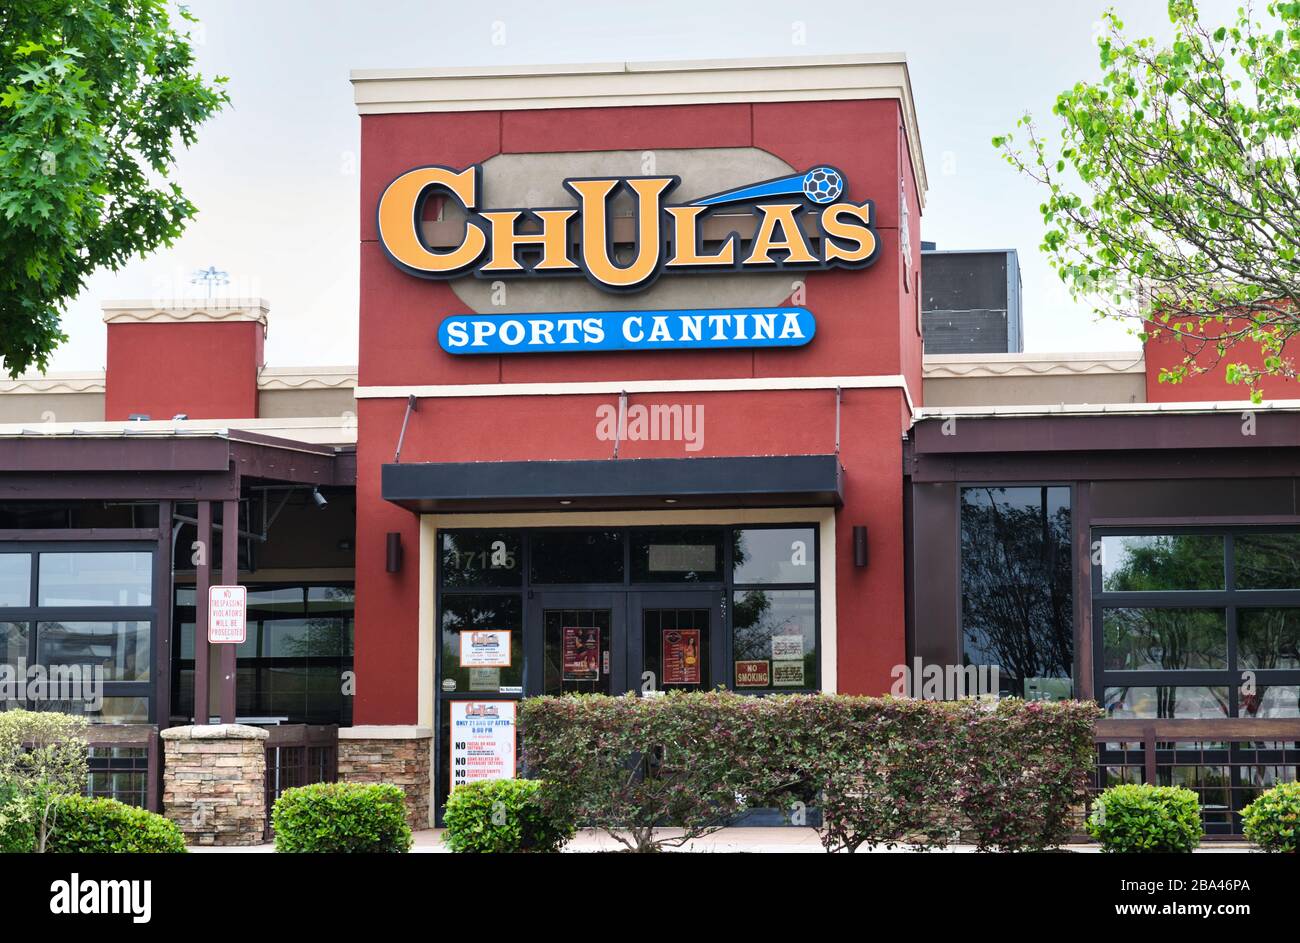 Houston, Texas/USA 25.03.2020: Chulas Sports Cantina Exterieur in Willowbrook in Houston, TX. Bar & Grill mit Live-Unterhaltung. Stockfoto